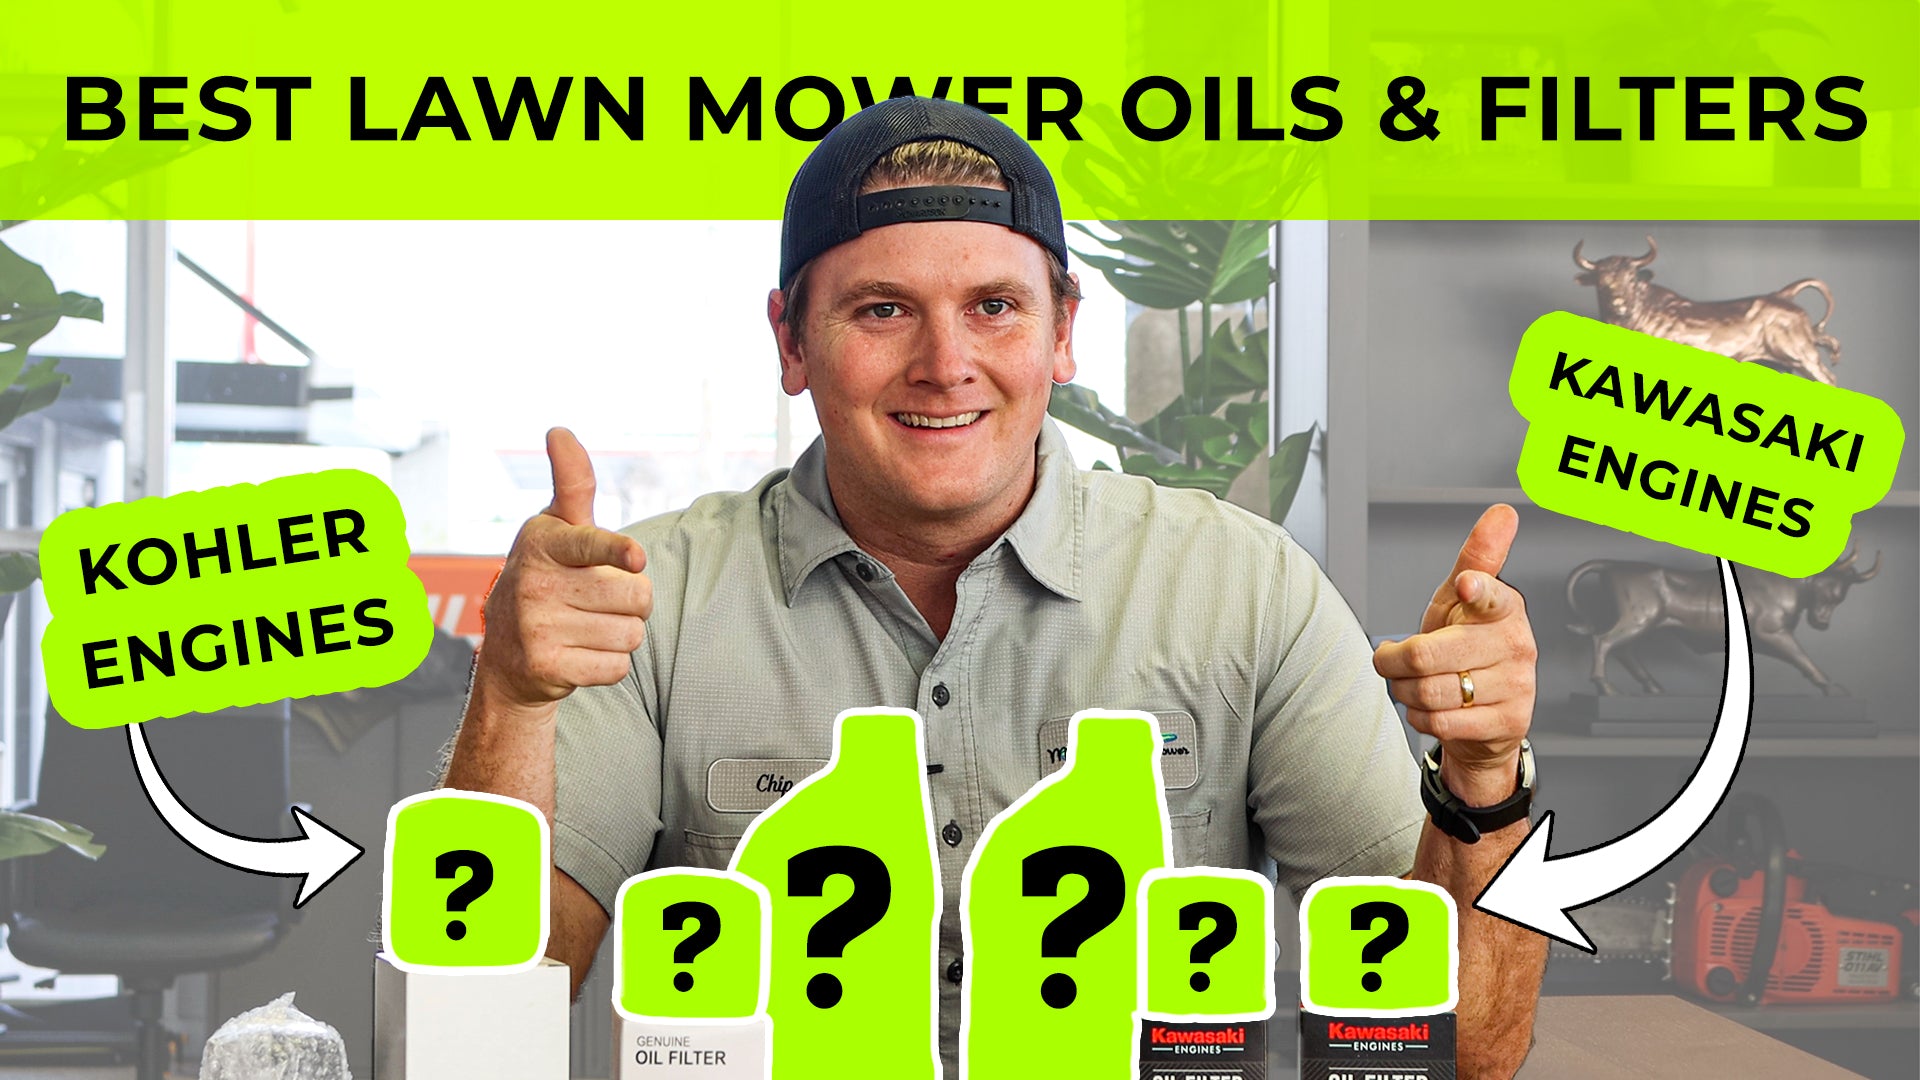 Don't miss out on expert tips for selecting the right oil and filters for your lawn mower. See why every lawn enthusiast trusts these products! 🛠️ #MowerMaintenance